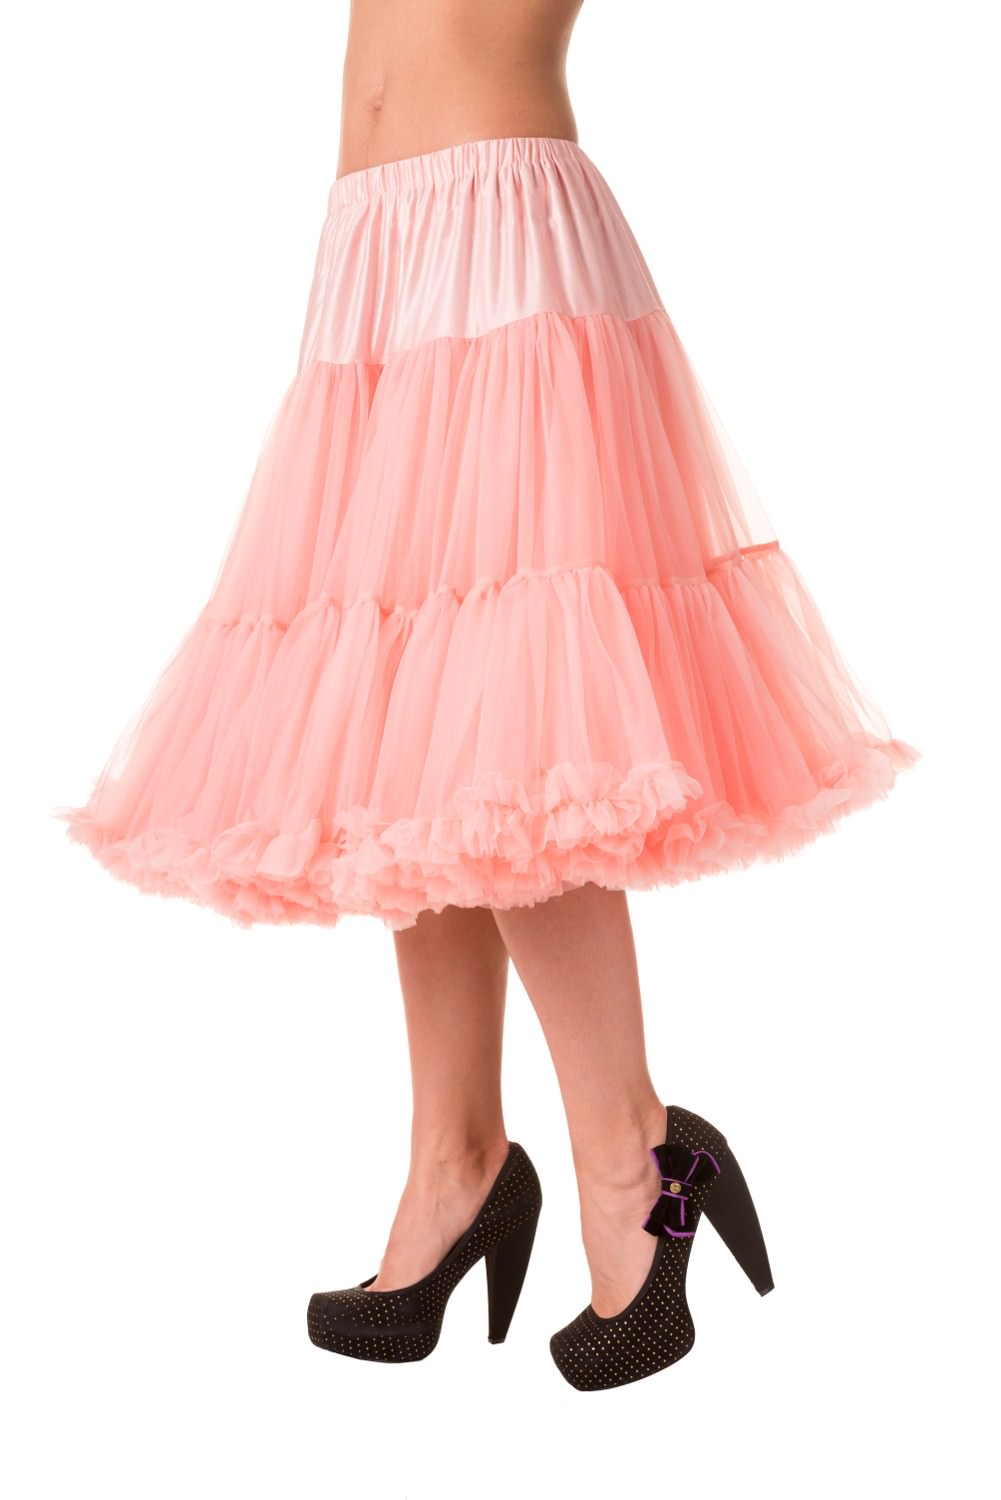 Banned Retro 50s Lizzy Lifeform Pink Petticoat